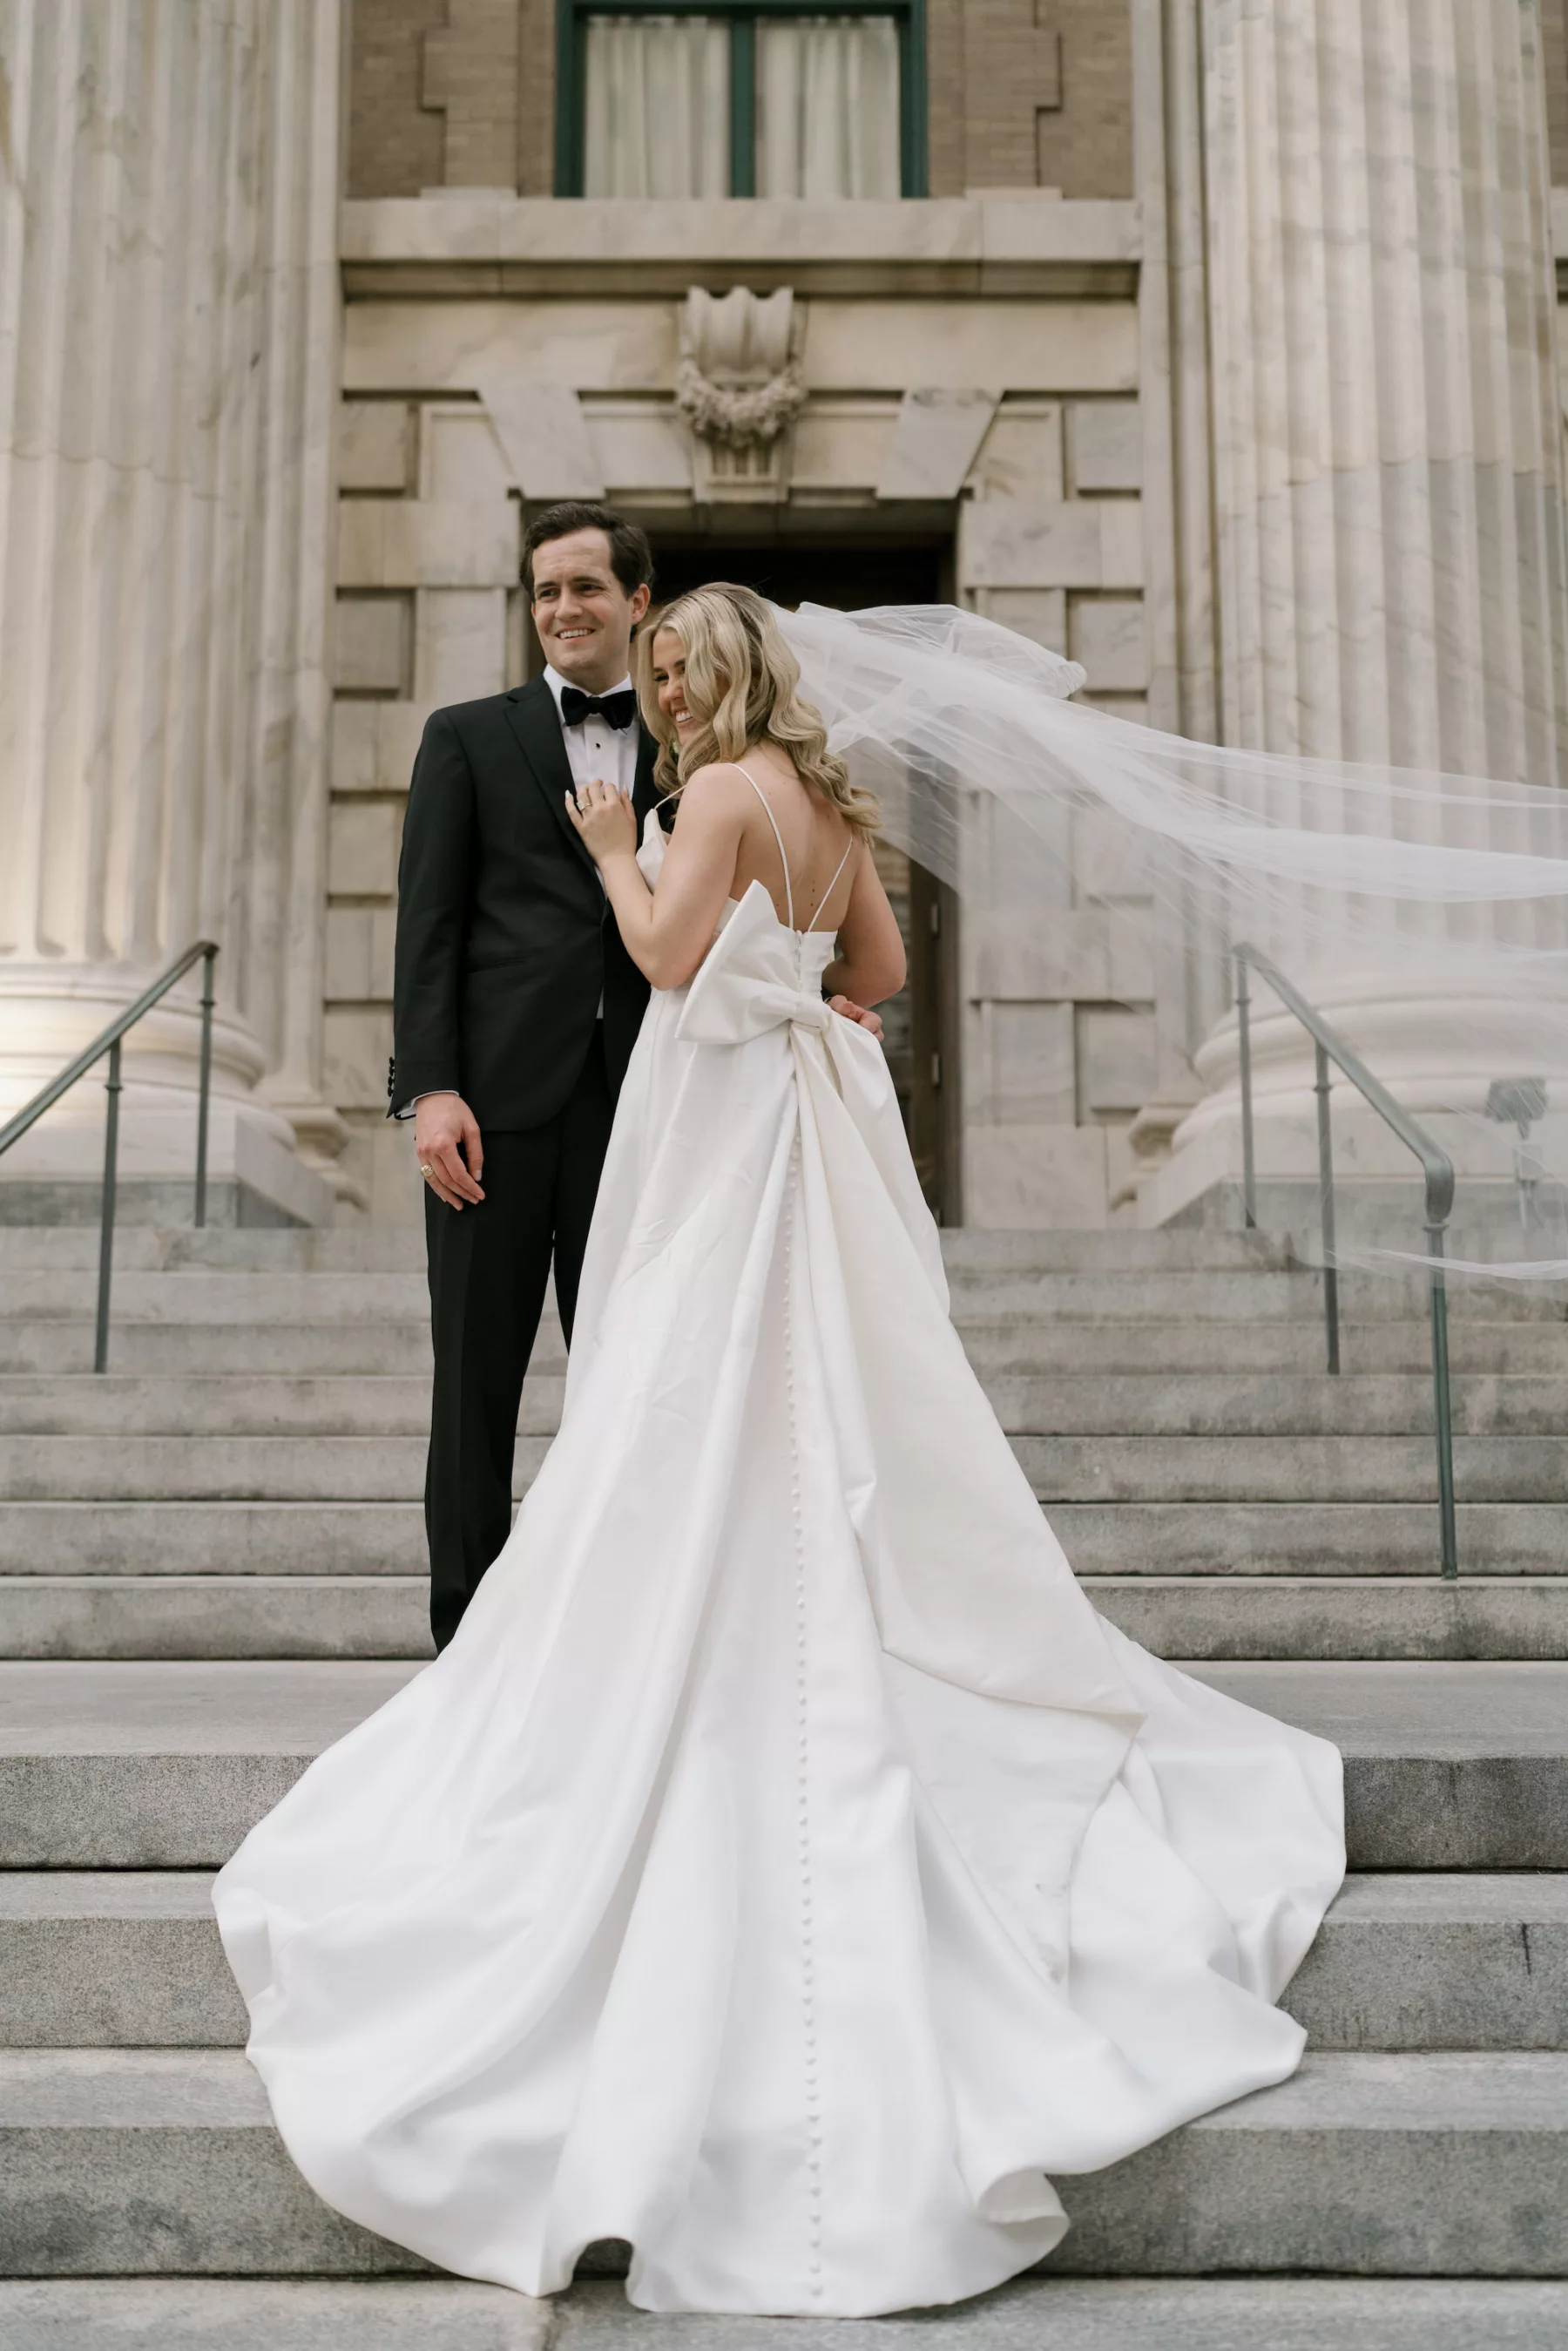 Romantic White Satin A Line Wedding Dress with Bow Inspiration | Downtown Tampa Venue Le Meridien